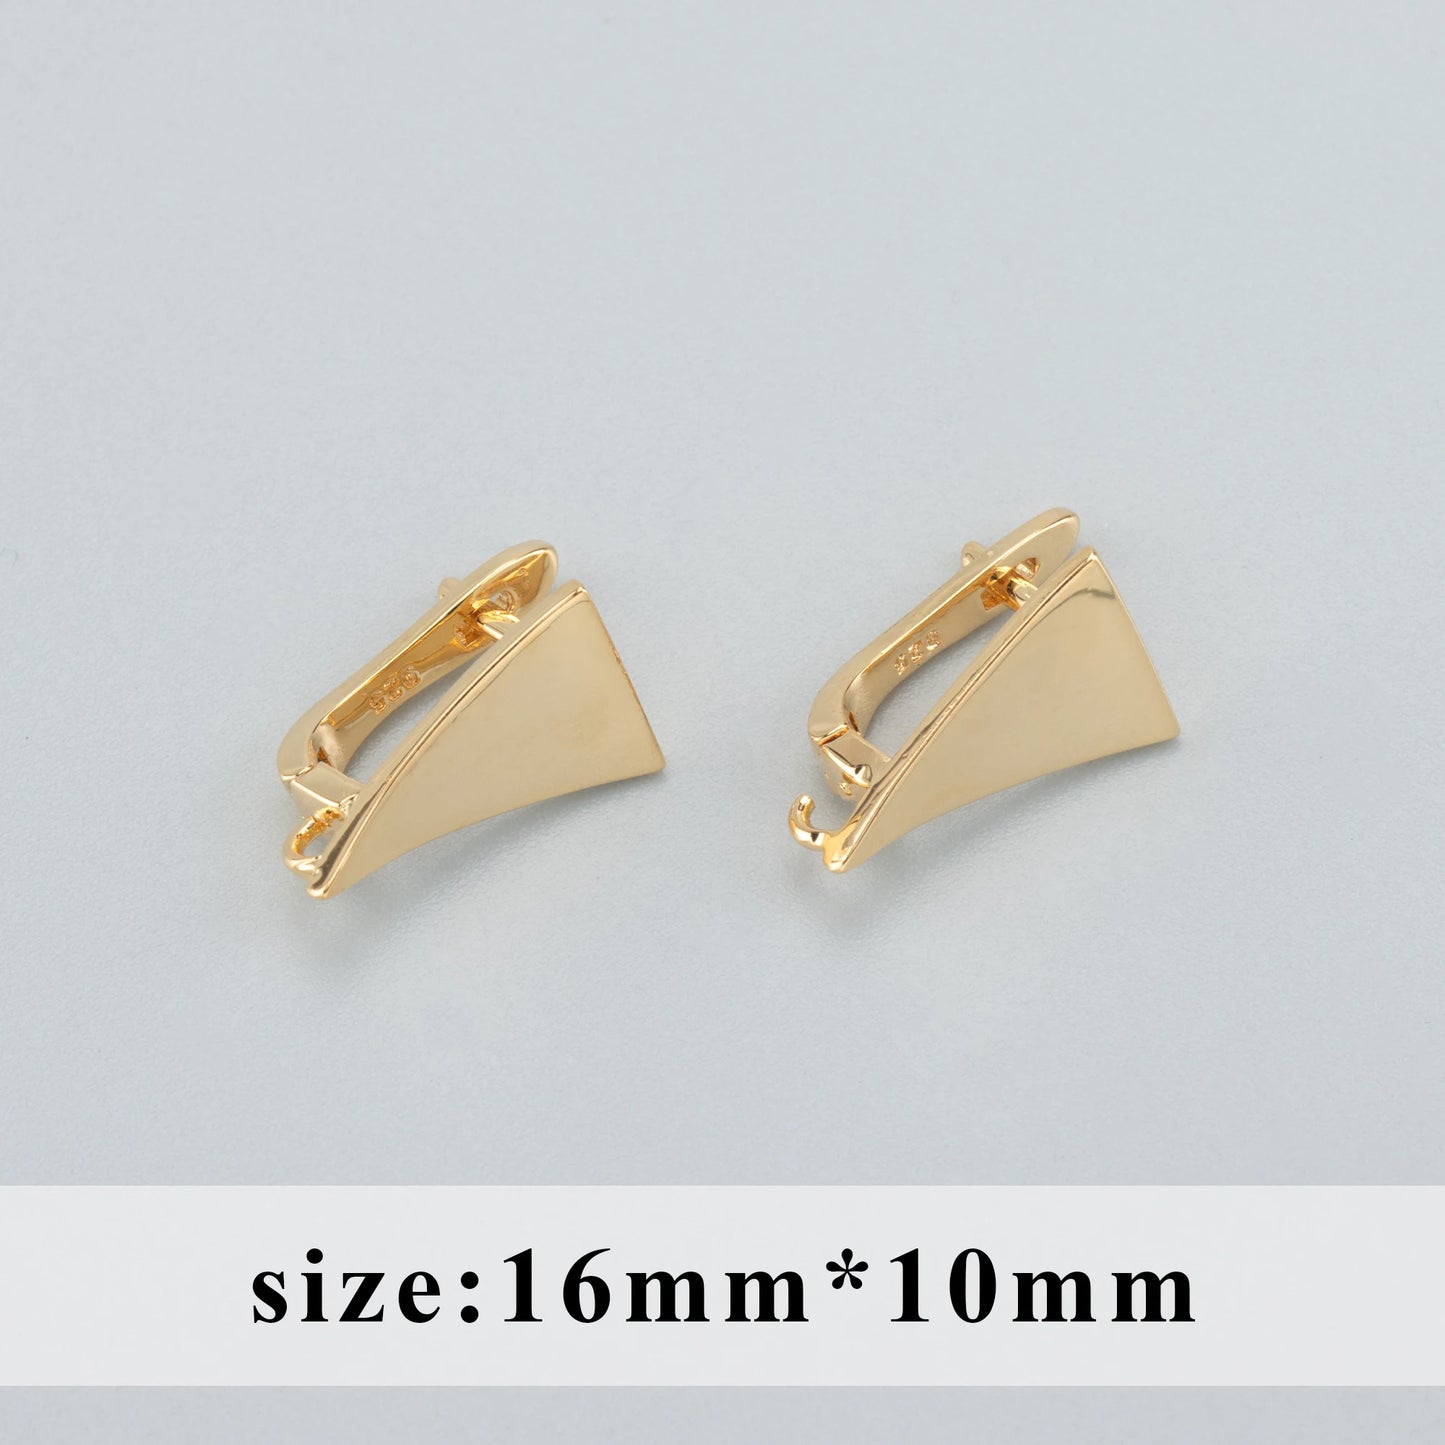 GUFEATHER M804,jewelry accessories,pass REACH,nickel free,18k gold plated,charms,jewelry making,ear clip,diy earrings,10pcs/lot